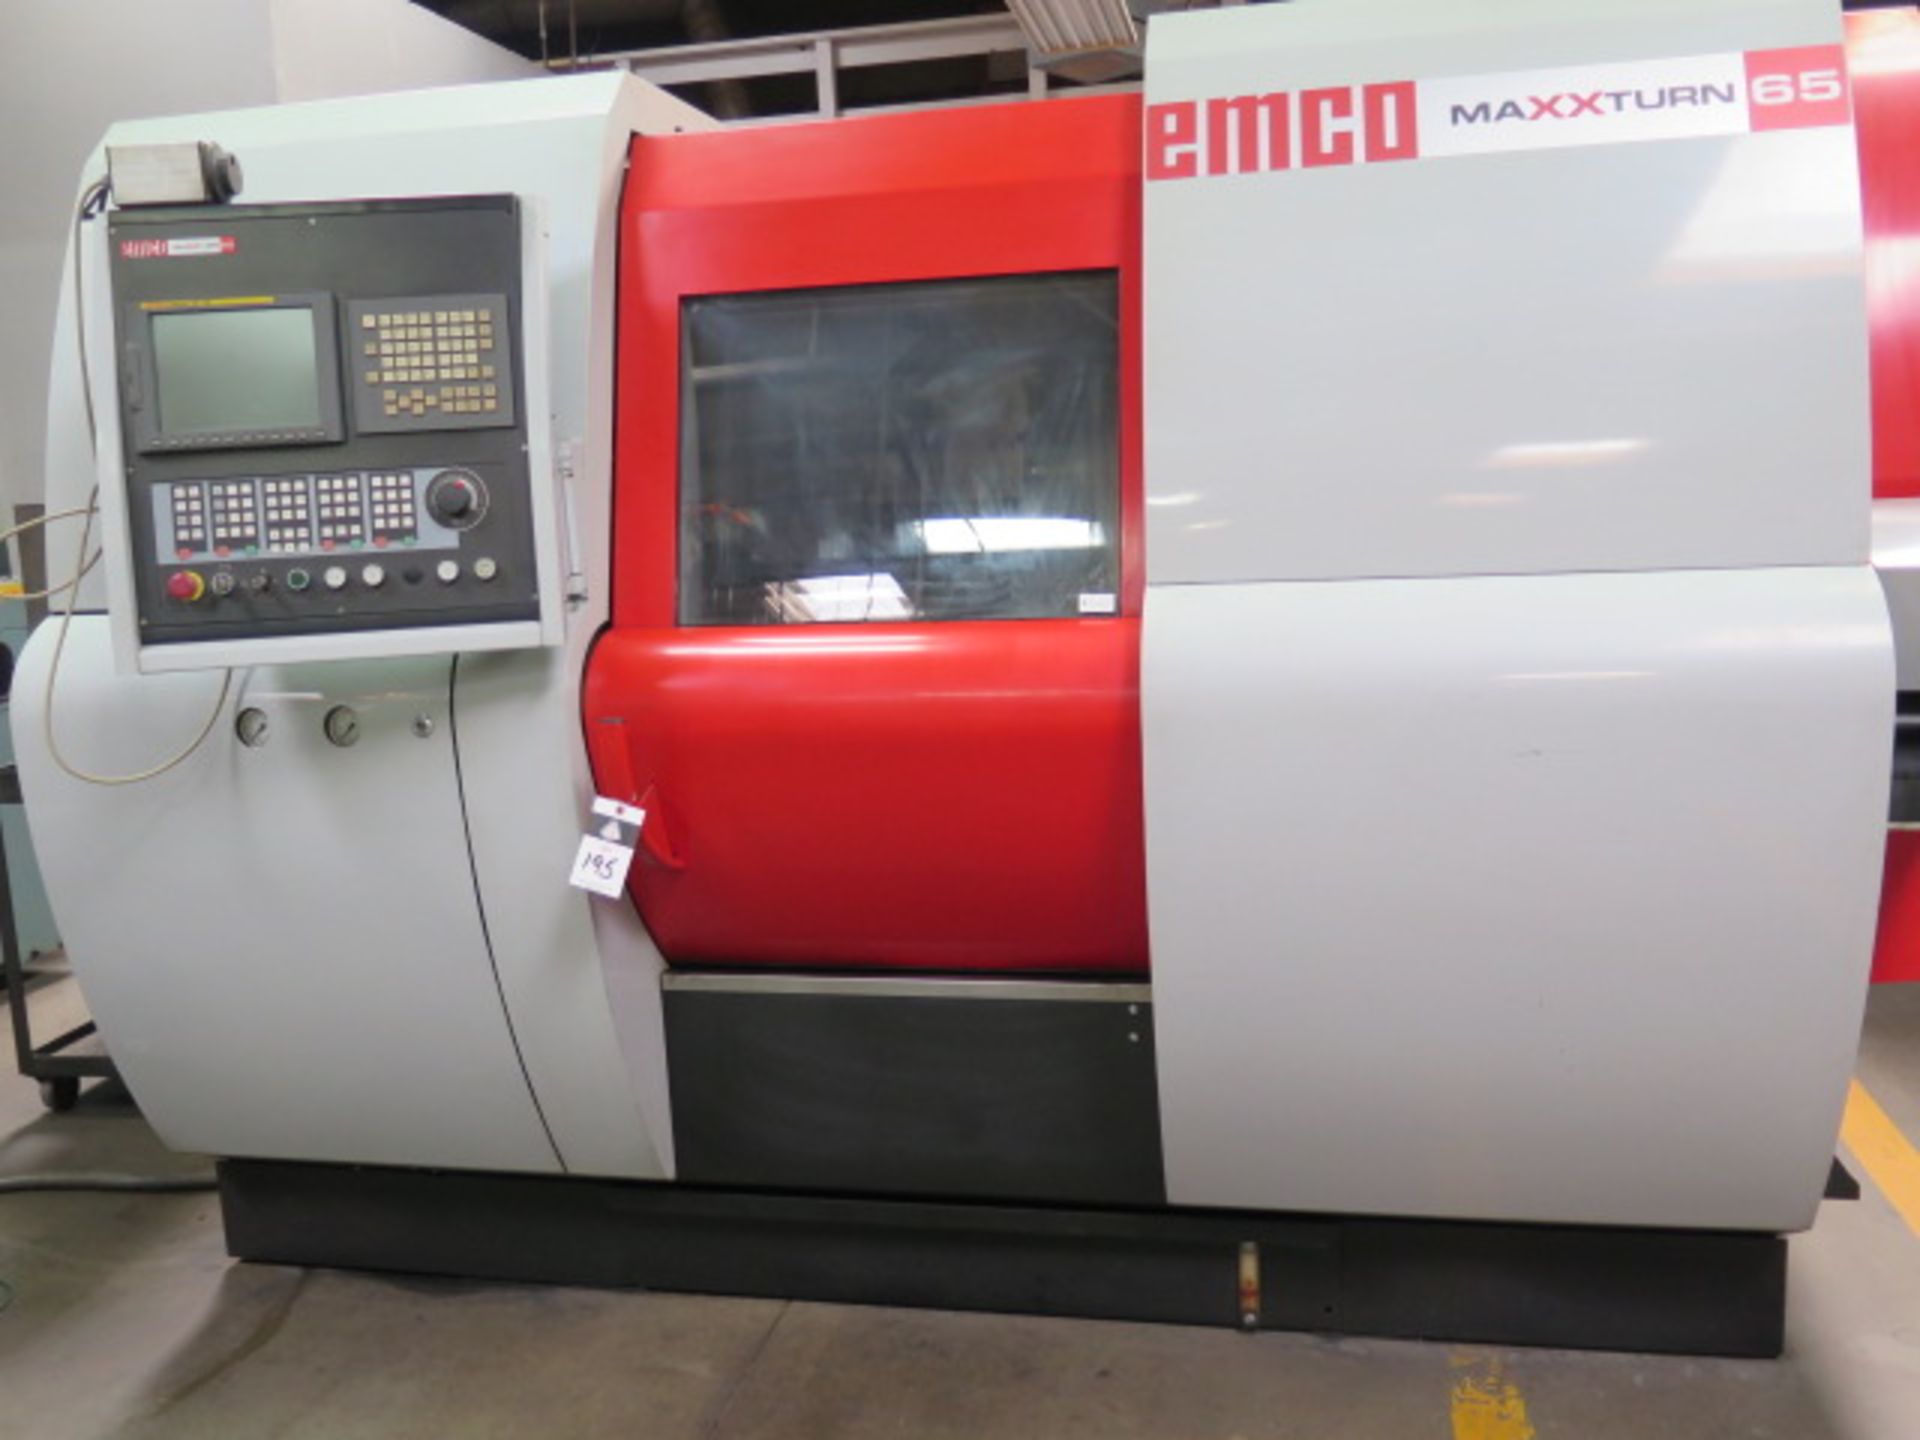 2007 Emco MaxxTurn 65 Twin Spindle, Live Turret CNC Turning Center s/n S6F-V03/S6BV-2559, SOLD AS IS